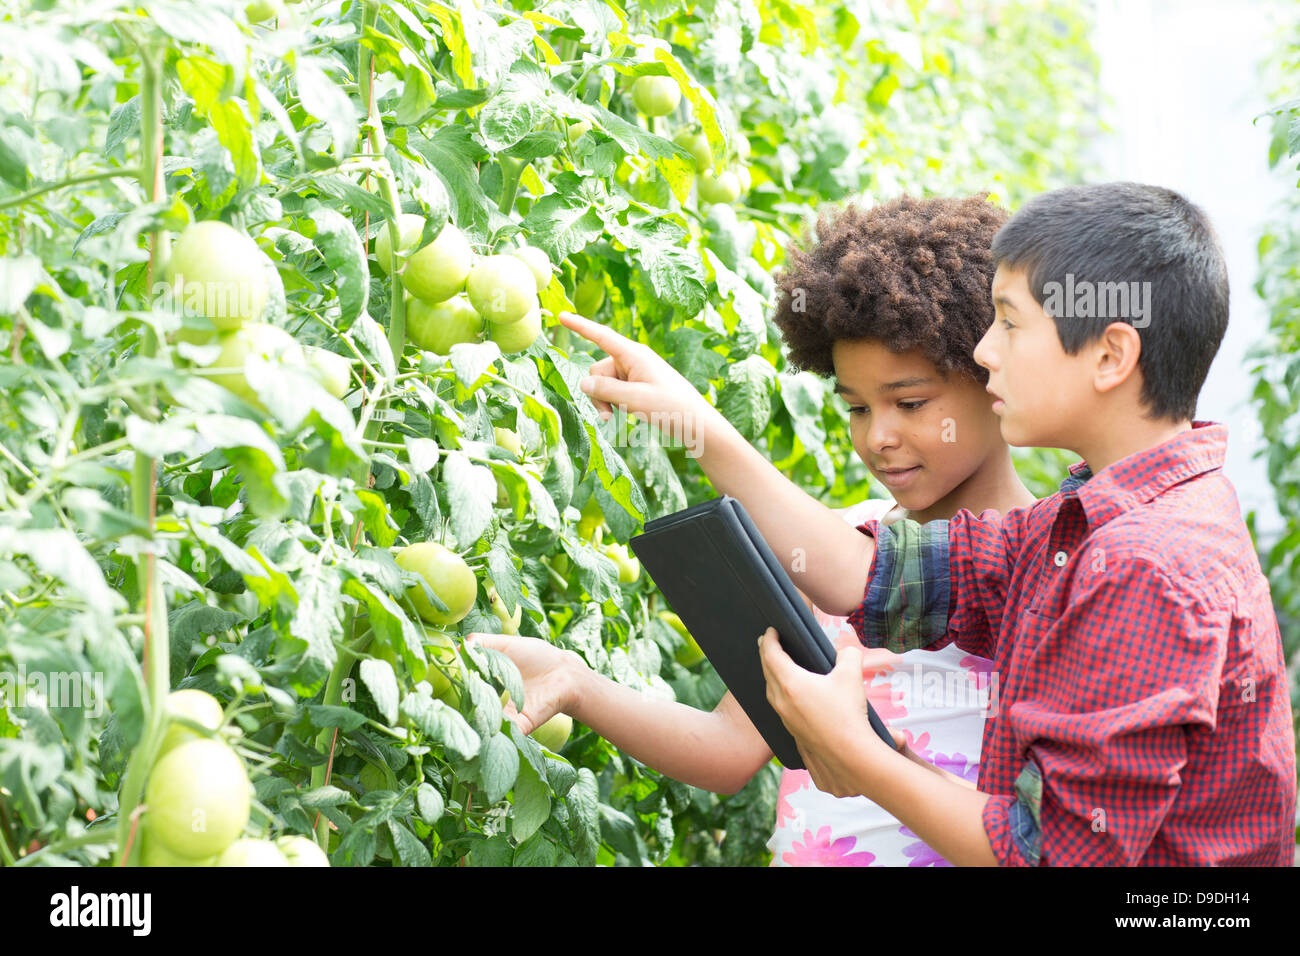 Boy and girl using digital tablet inspecting tomato plants Stock Photo